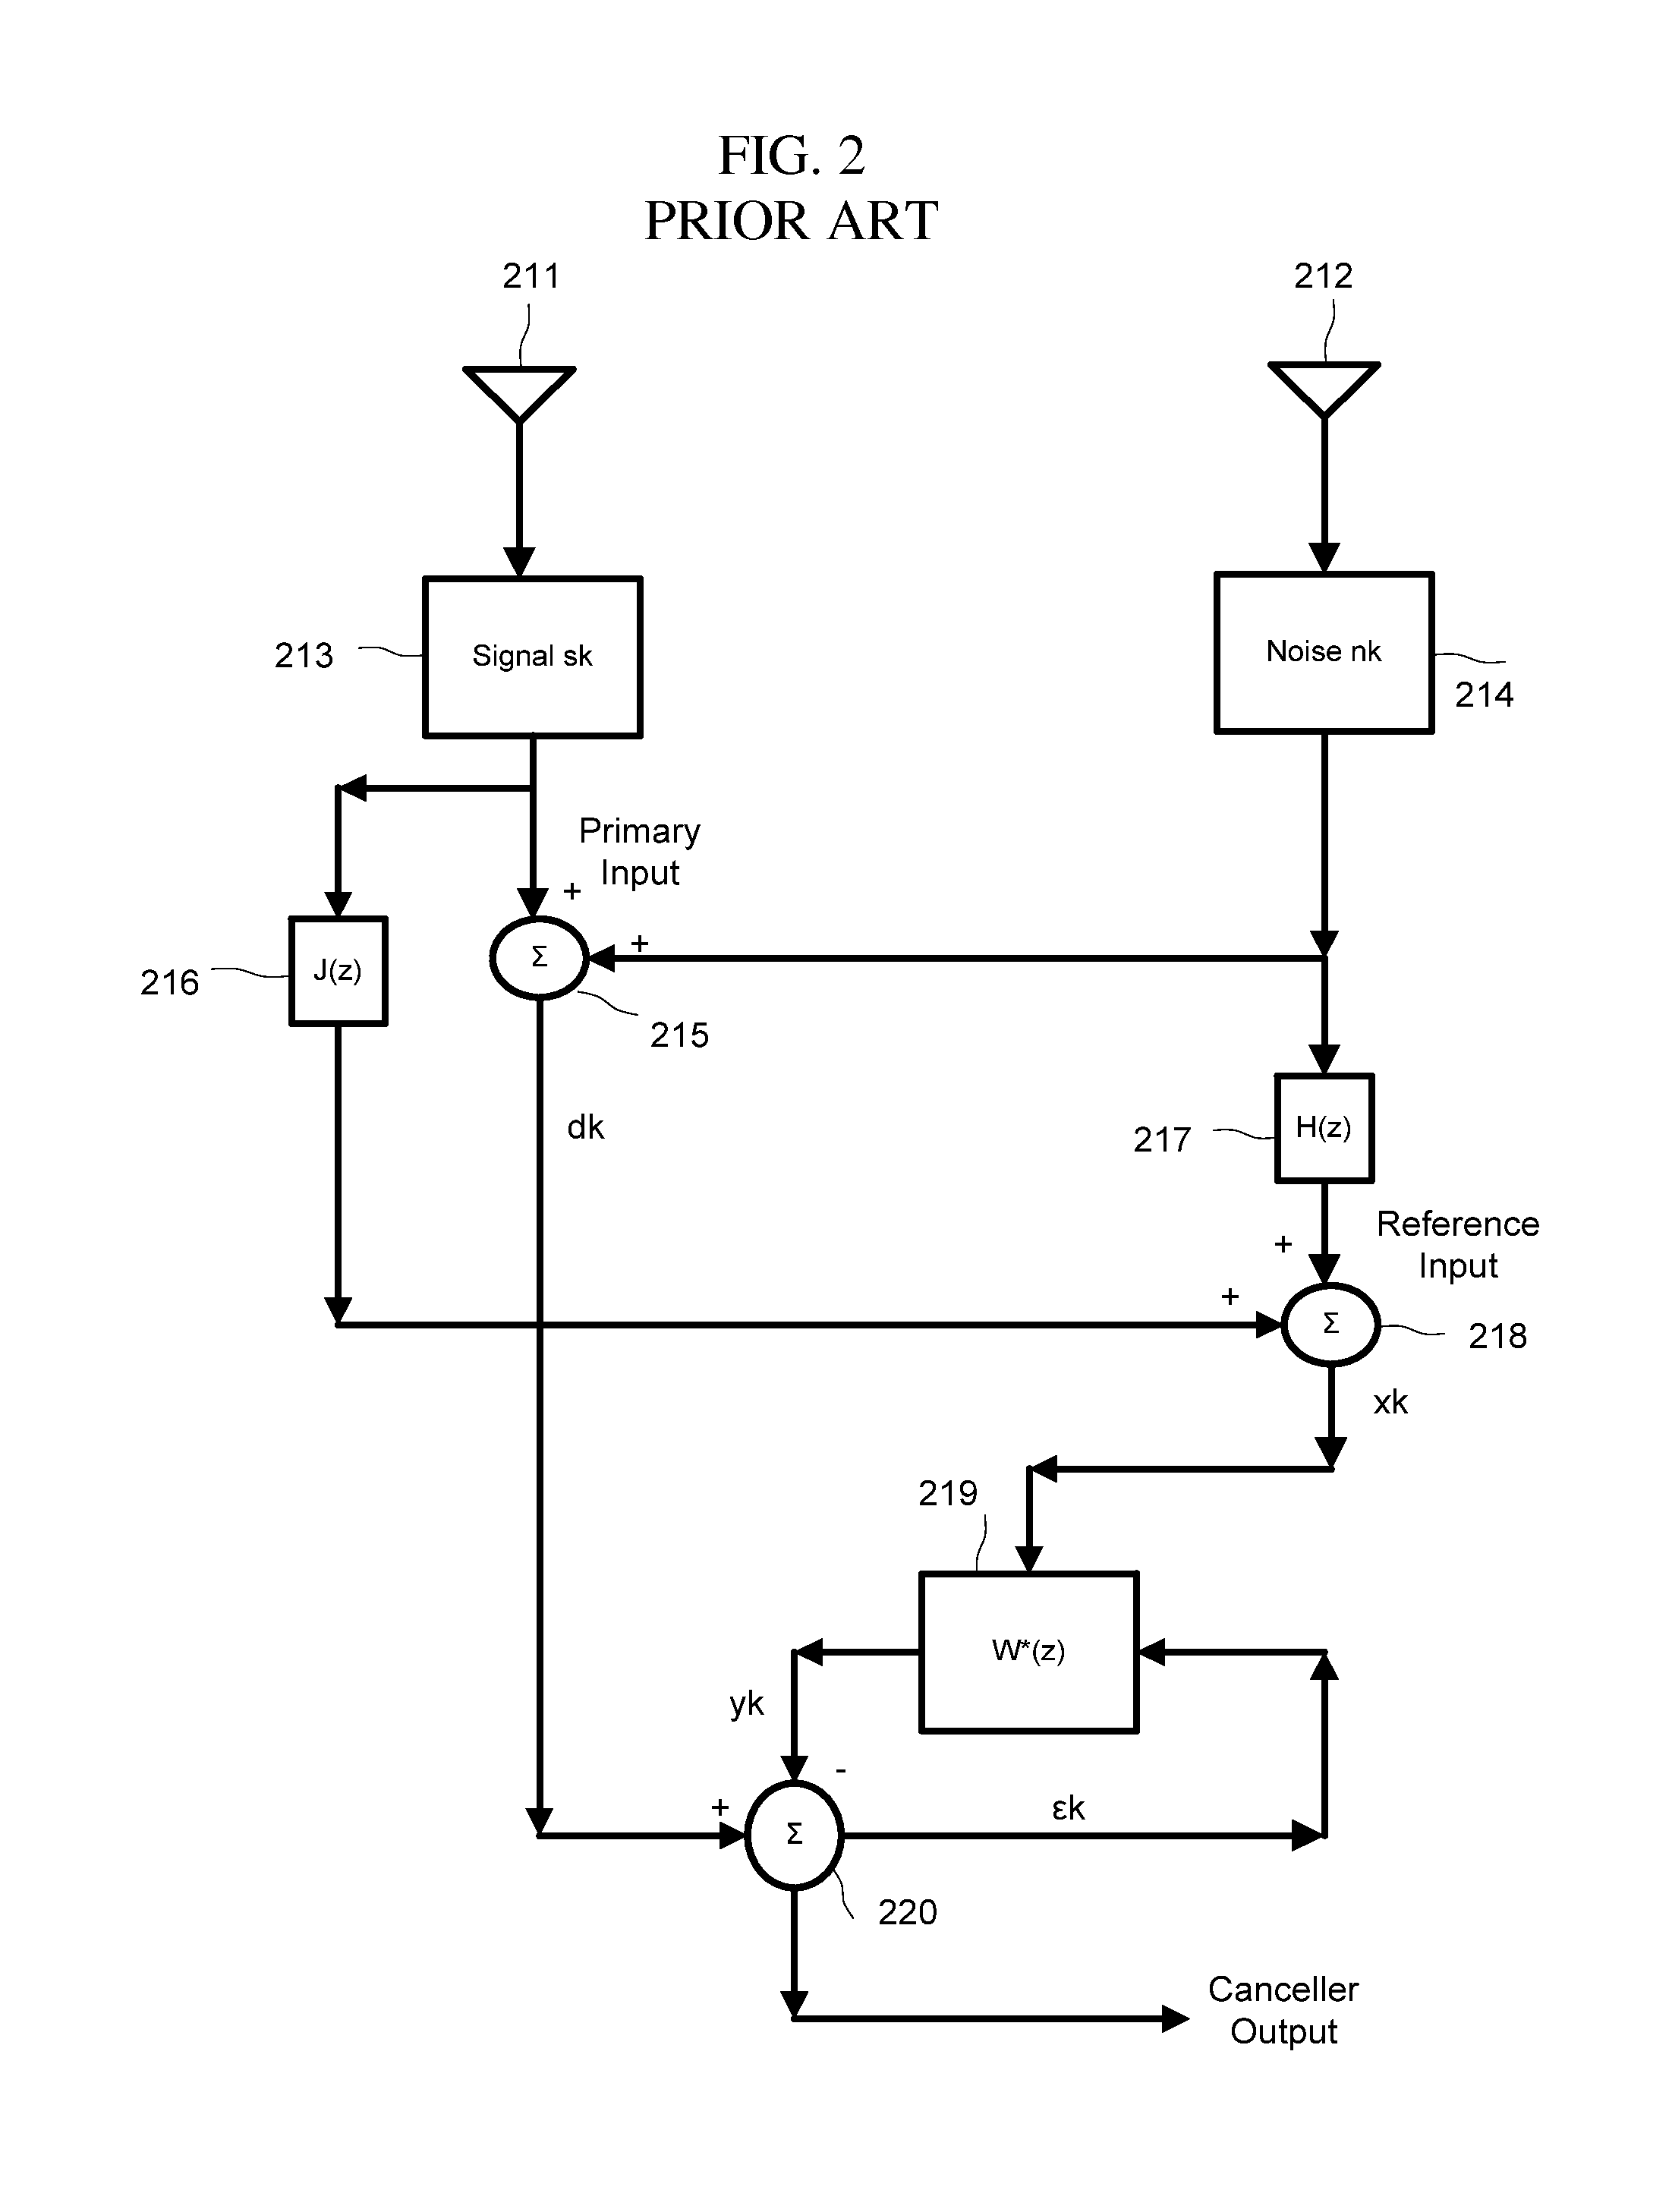 Method and device for improving audio signal quality in a voice communication system